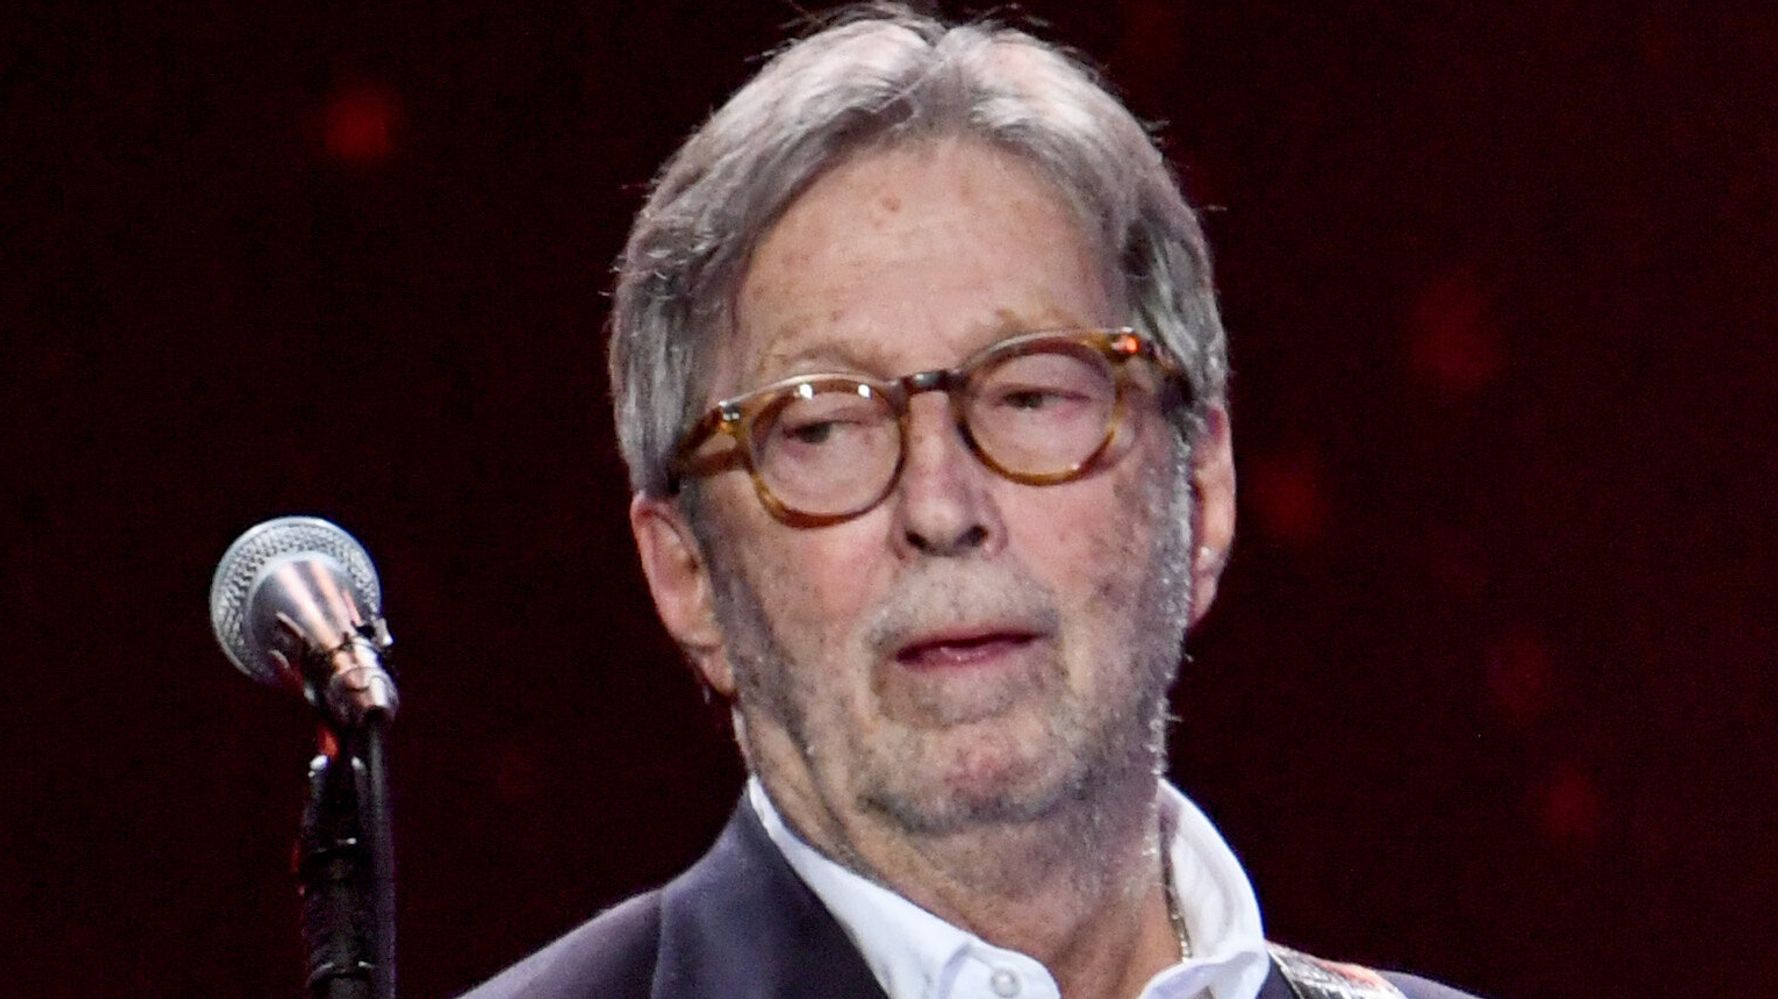 Eric Clapton Claims People Who Receive COVID-19 Vaccines Are Under 'Mass Hypnosis'